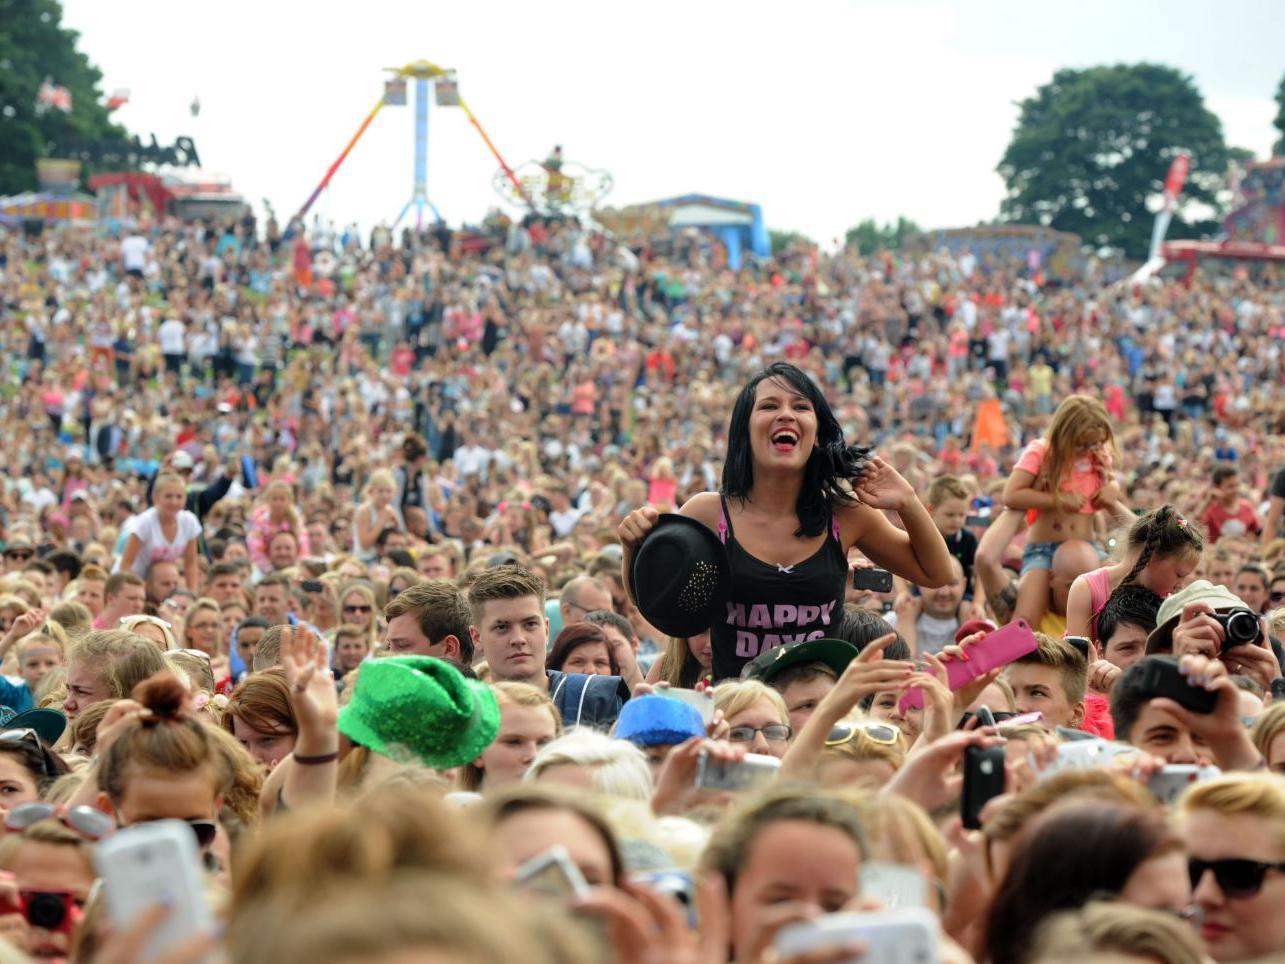 The free music festival was held annually at Temple Newsam until 2014, when it was cancelled due to lack of funds. Busted, Arctic Monkeys, Olly Murs and Ricky Martin were among those who played it.